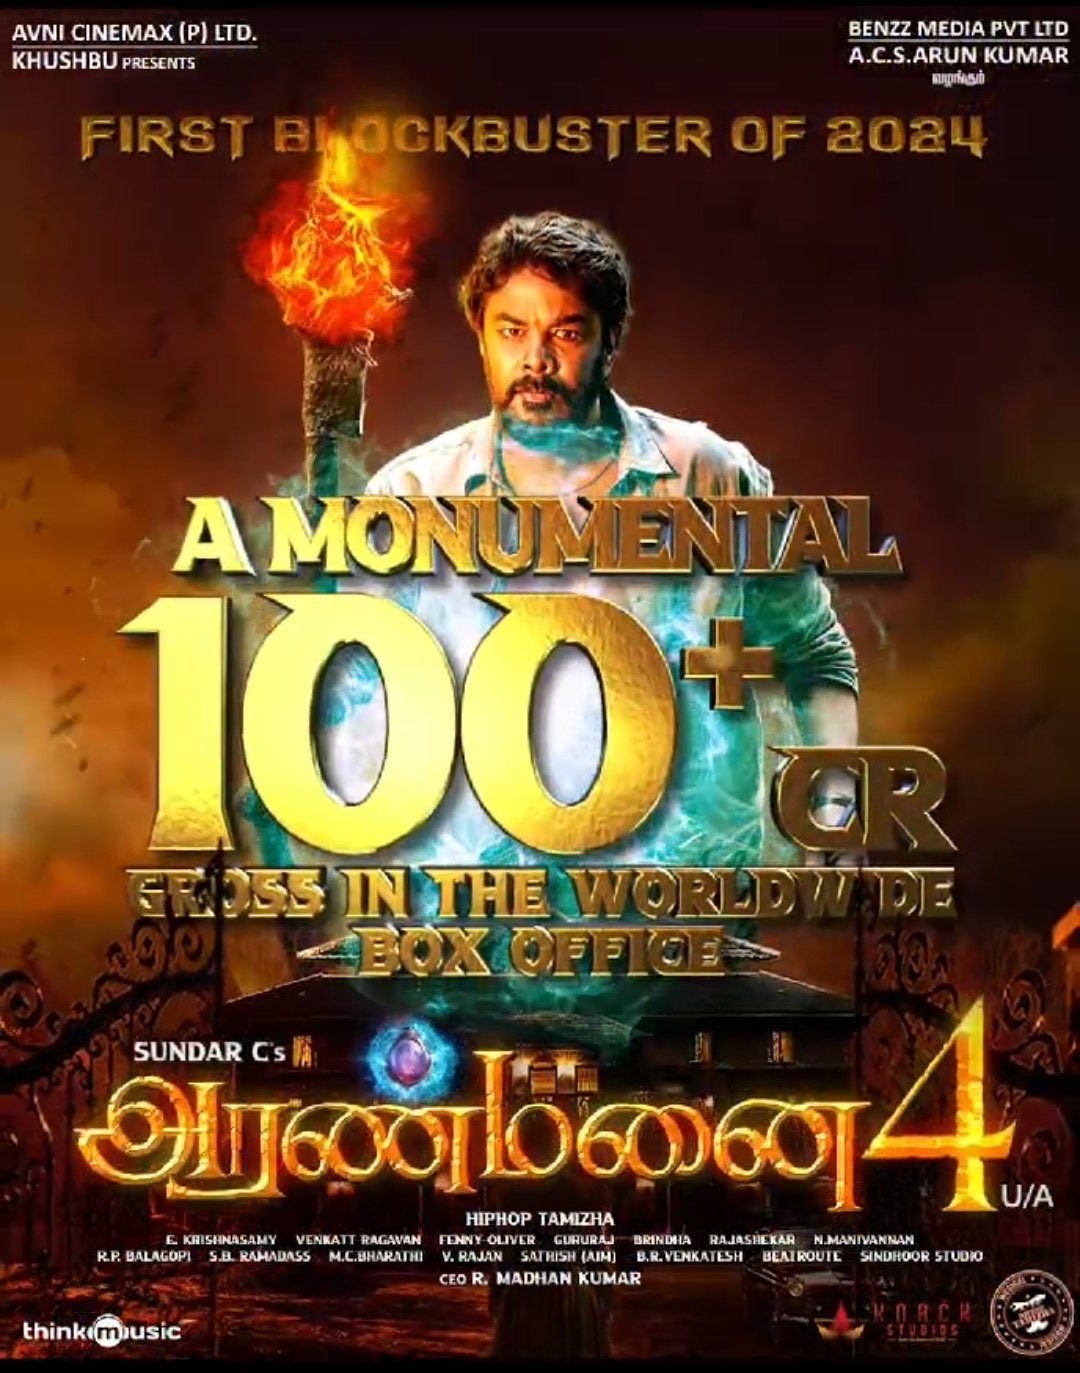 Aranmanai4 100crs Worldwide Collections